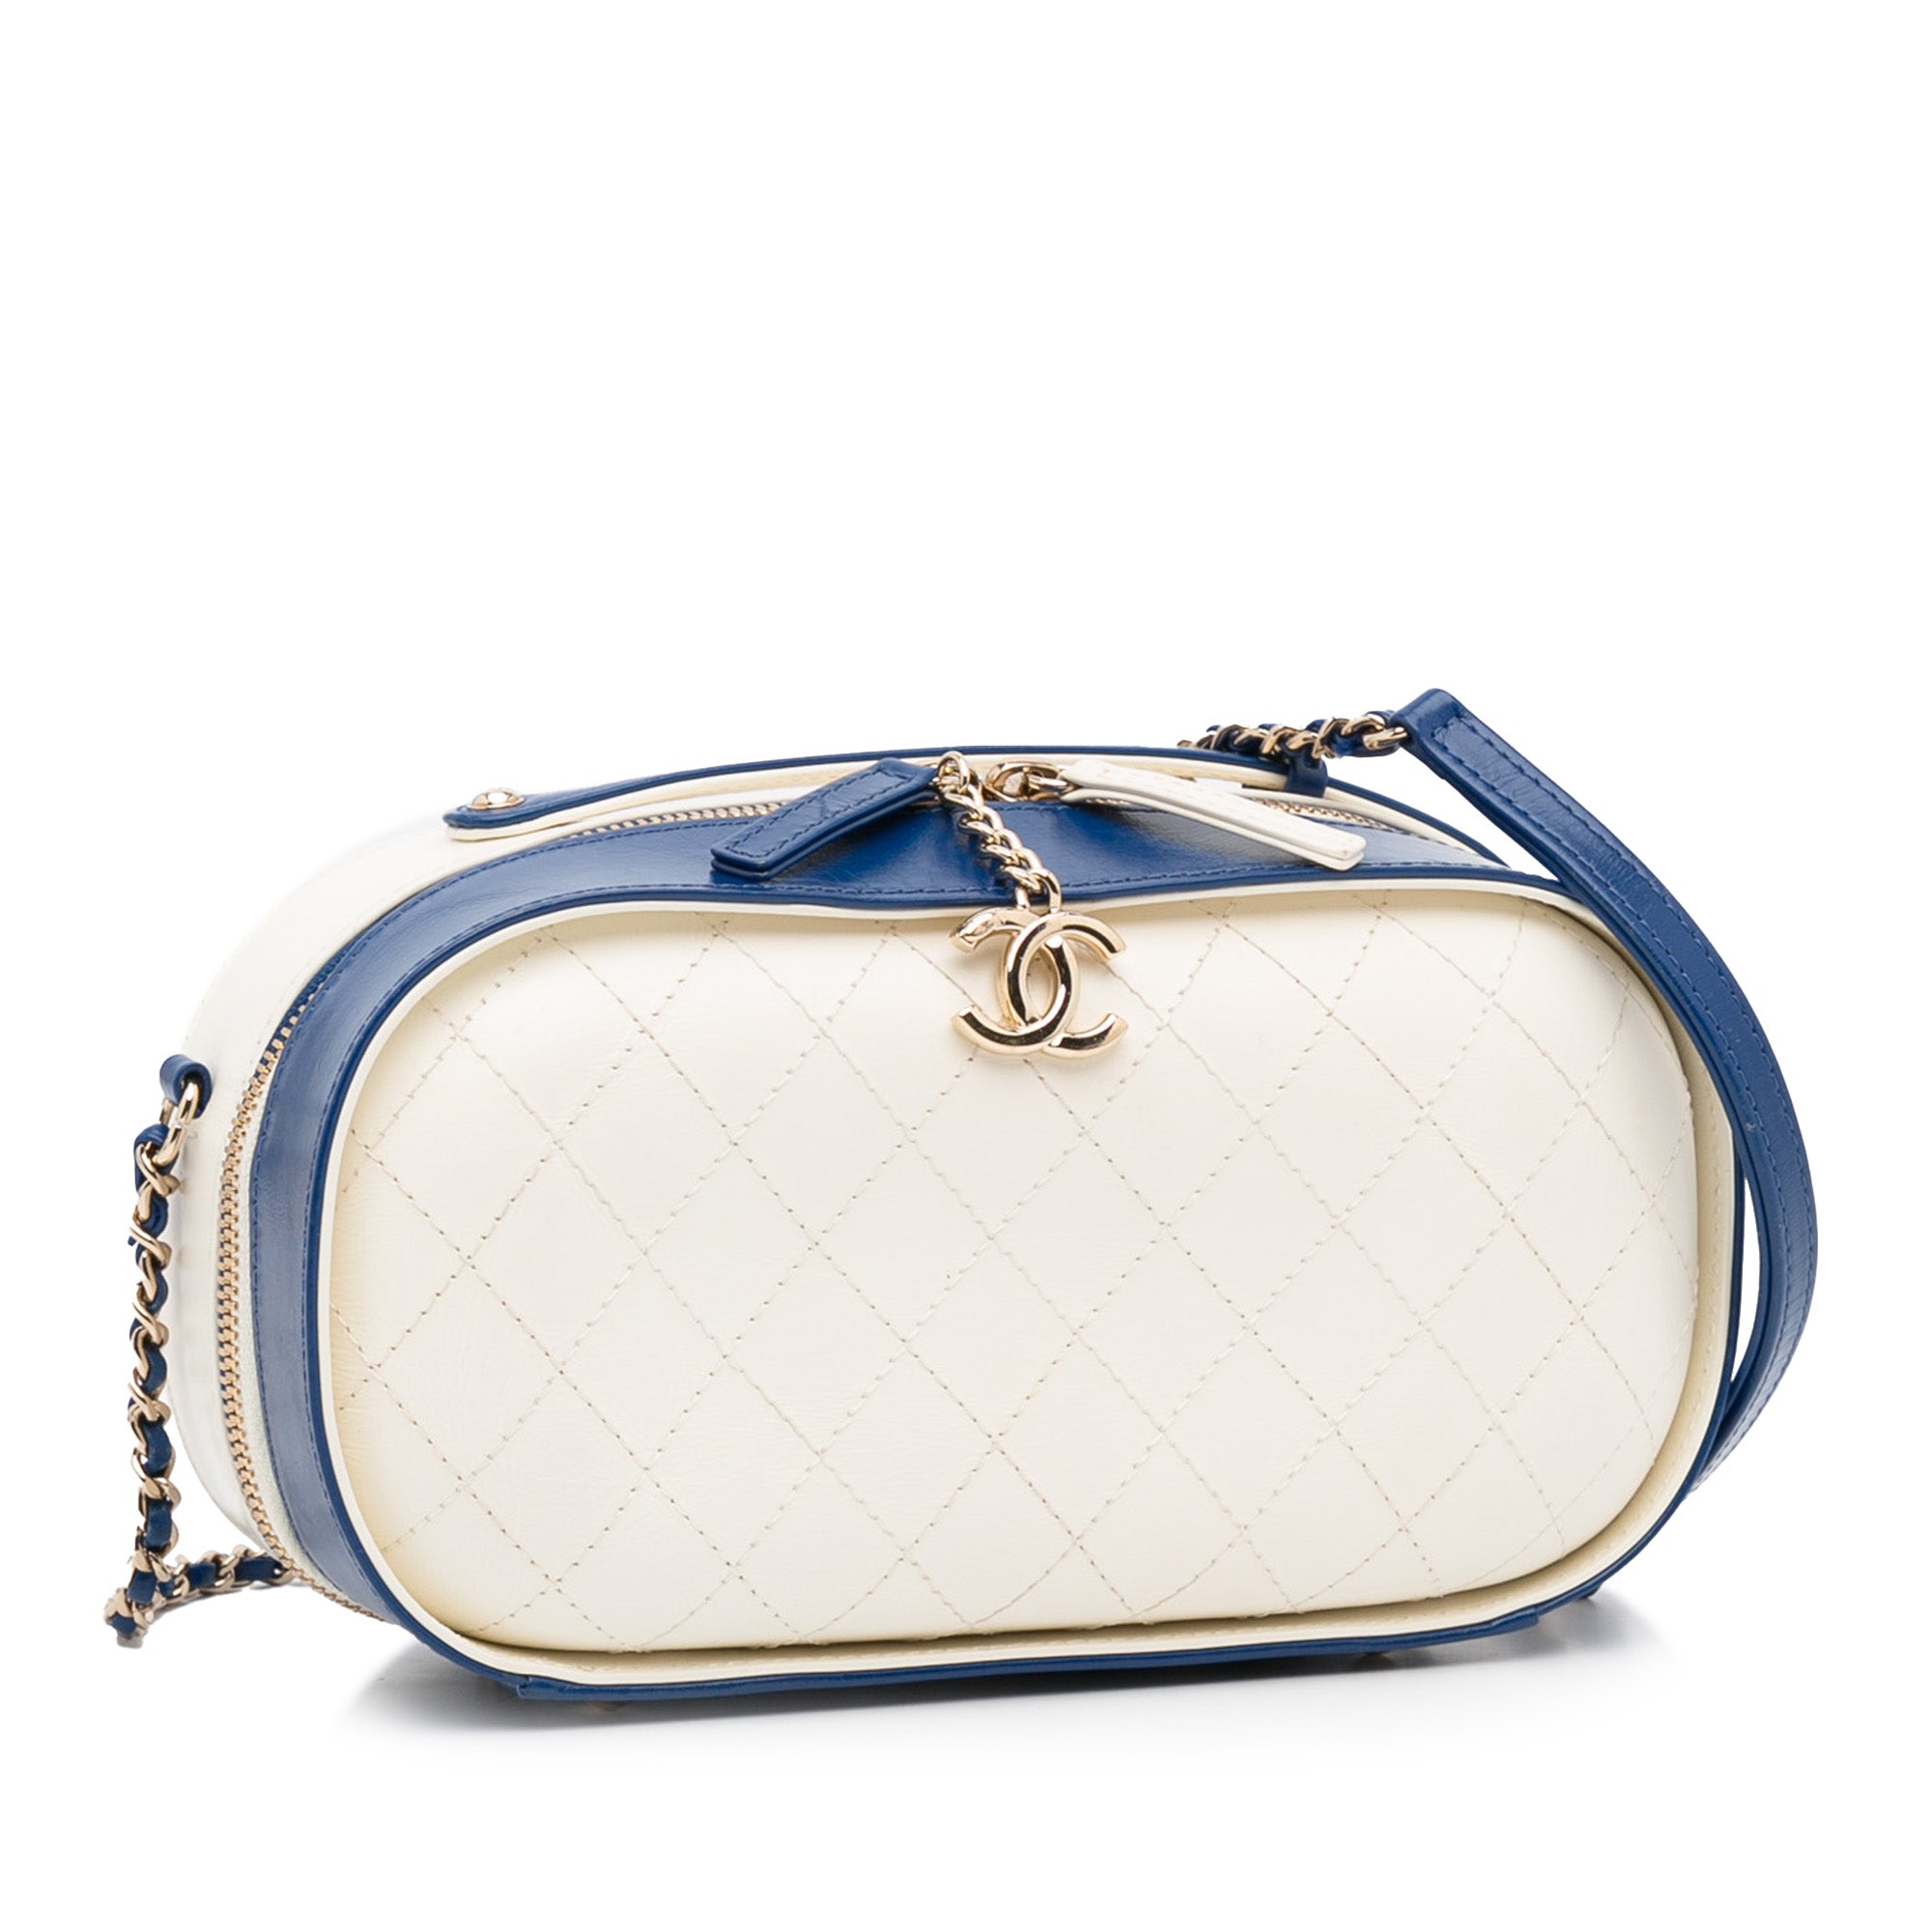 White Chanel Quilted Leather Satchel – Designer Revival